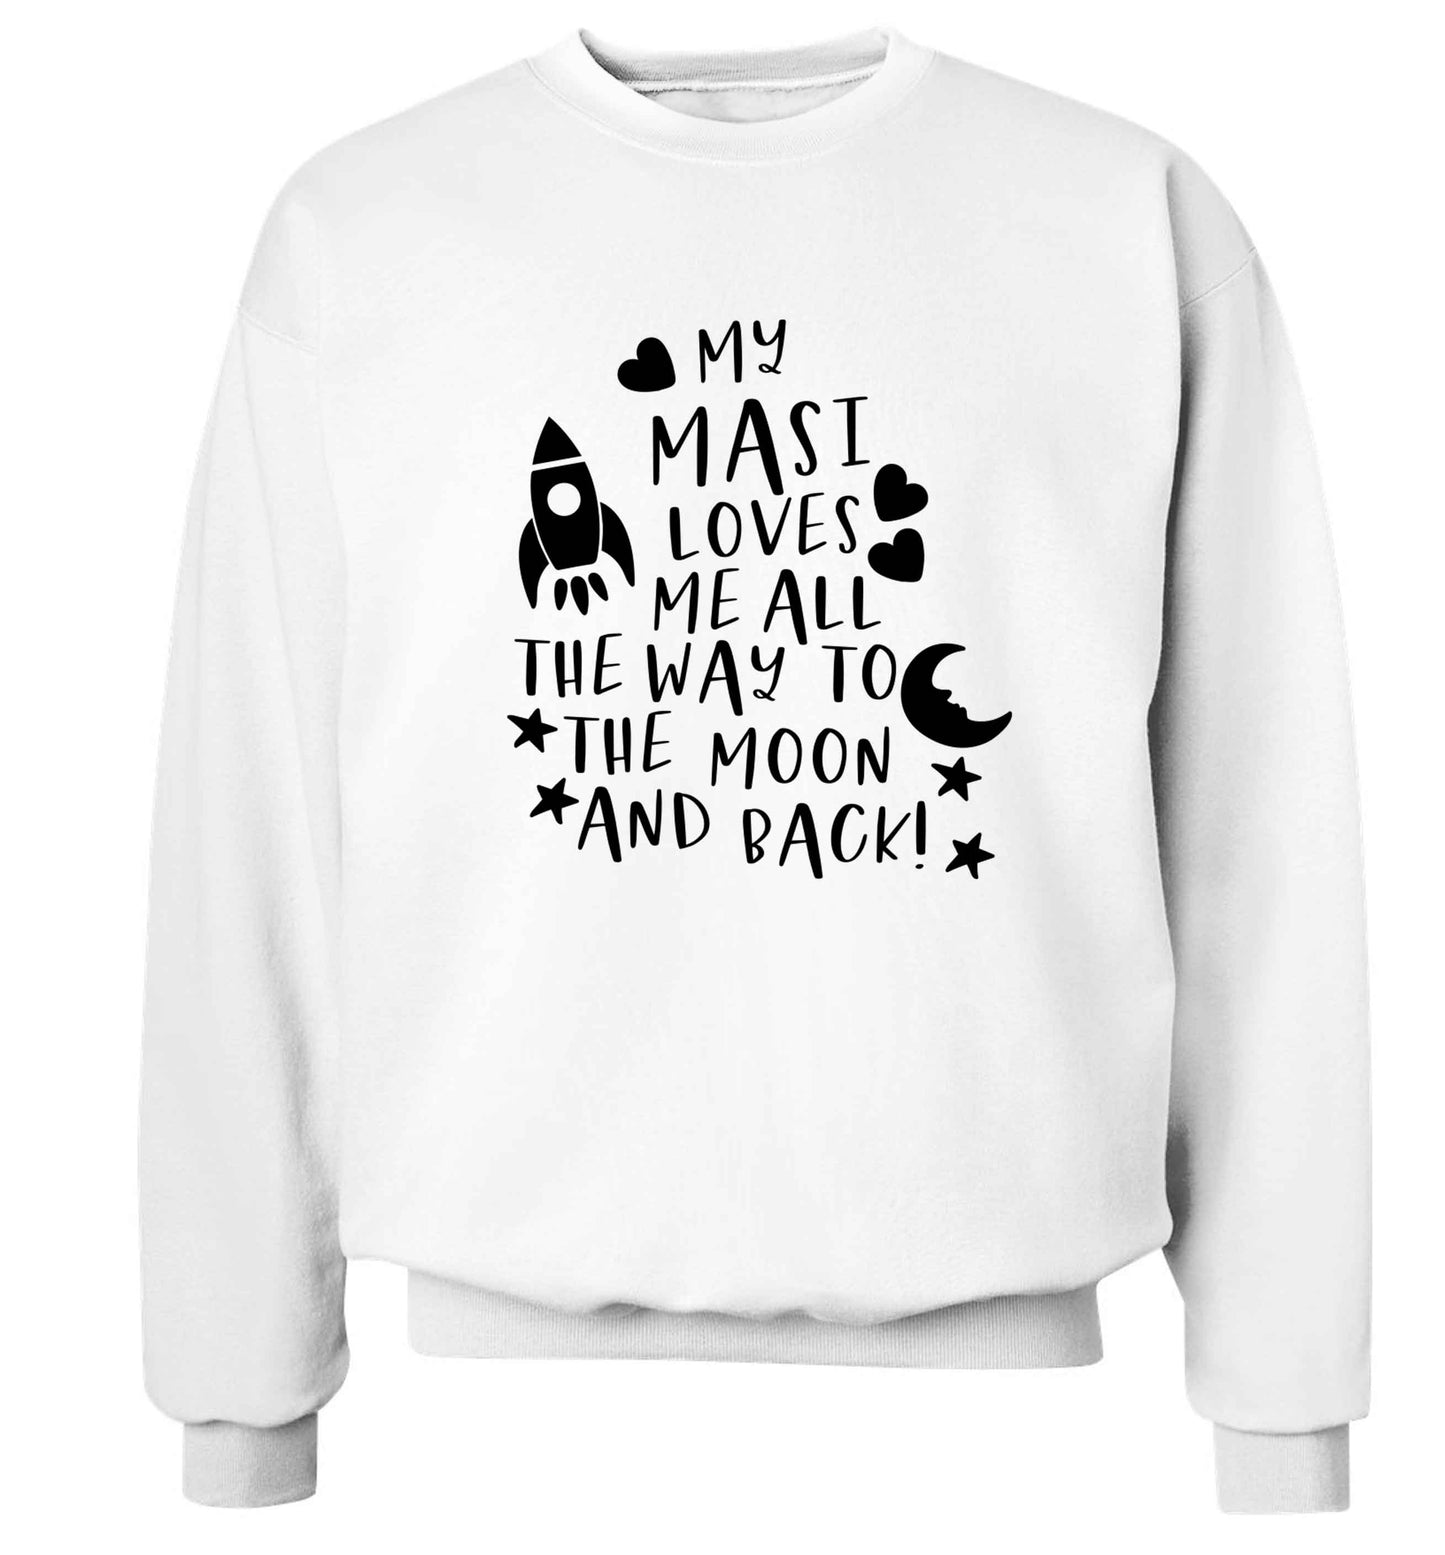 My masi loves me all the way to the moon and back Adult's unisex white Sweater 2XL